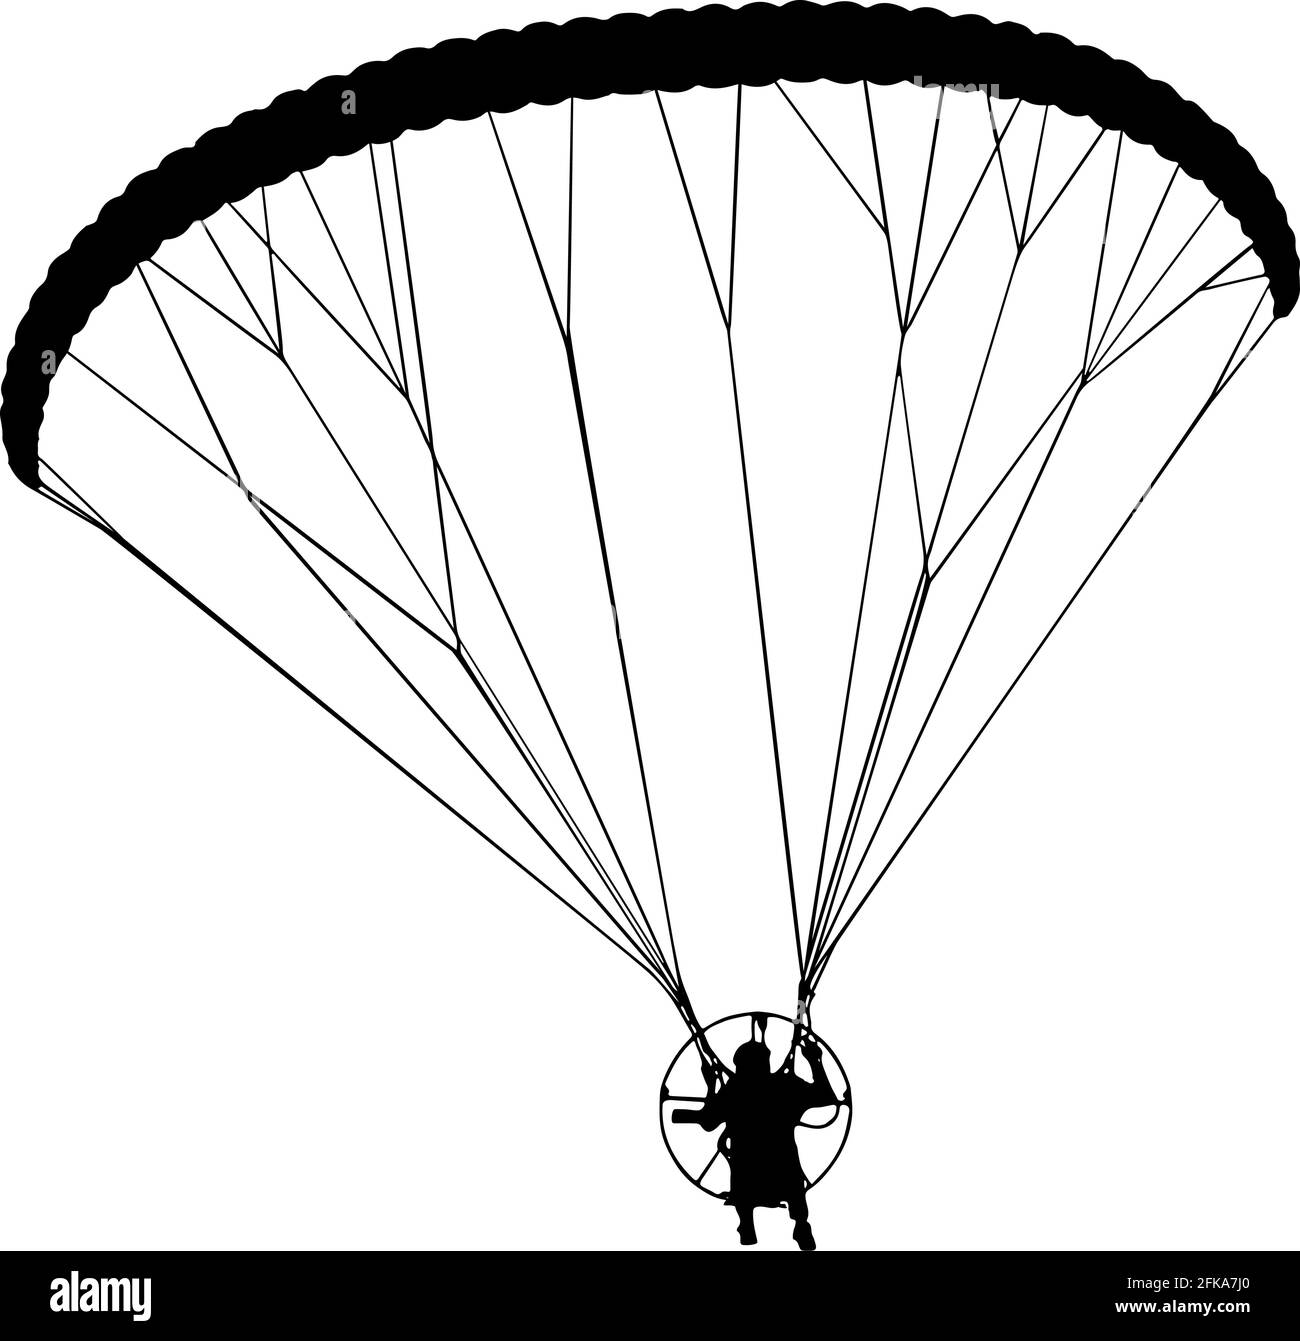 Powered paraglider vector illustration in black on white background Stock Vector